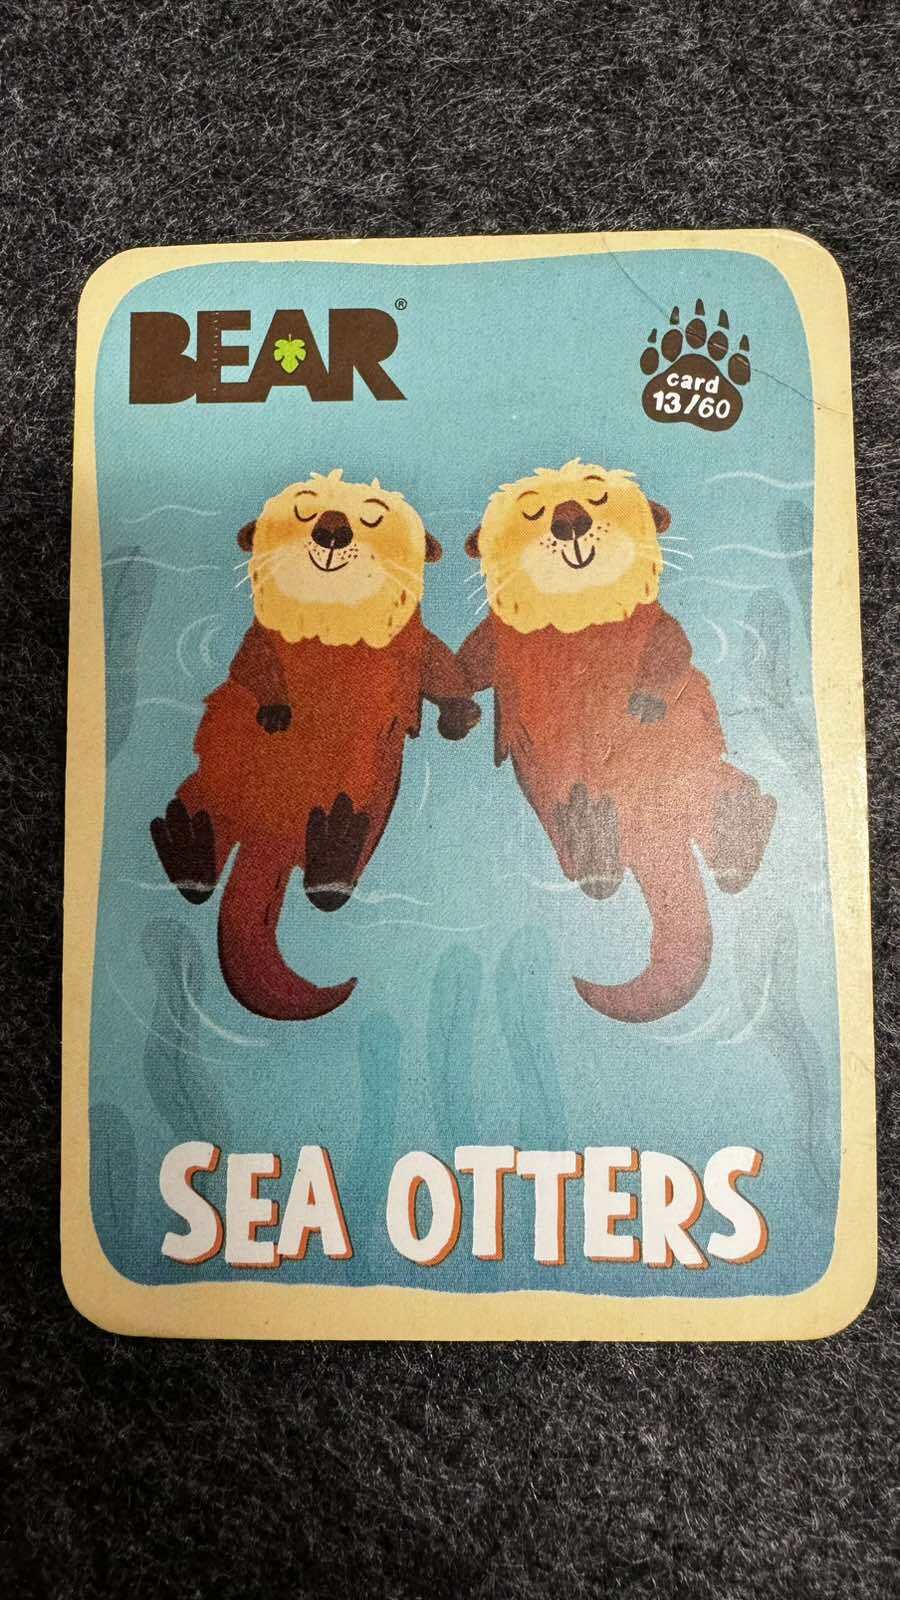 Bear Fruit Snack Animal Cards - Various animals - Complete Your Set